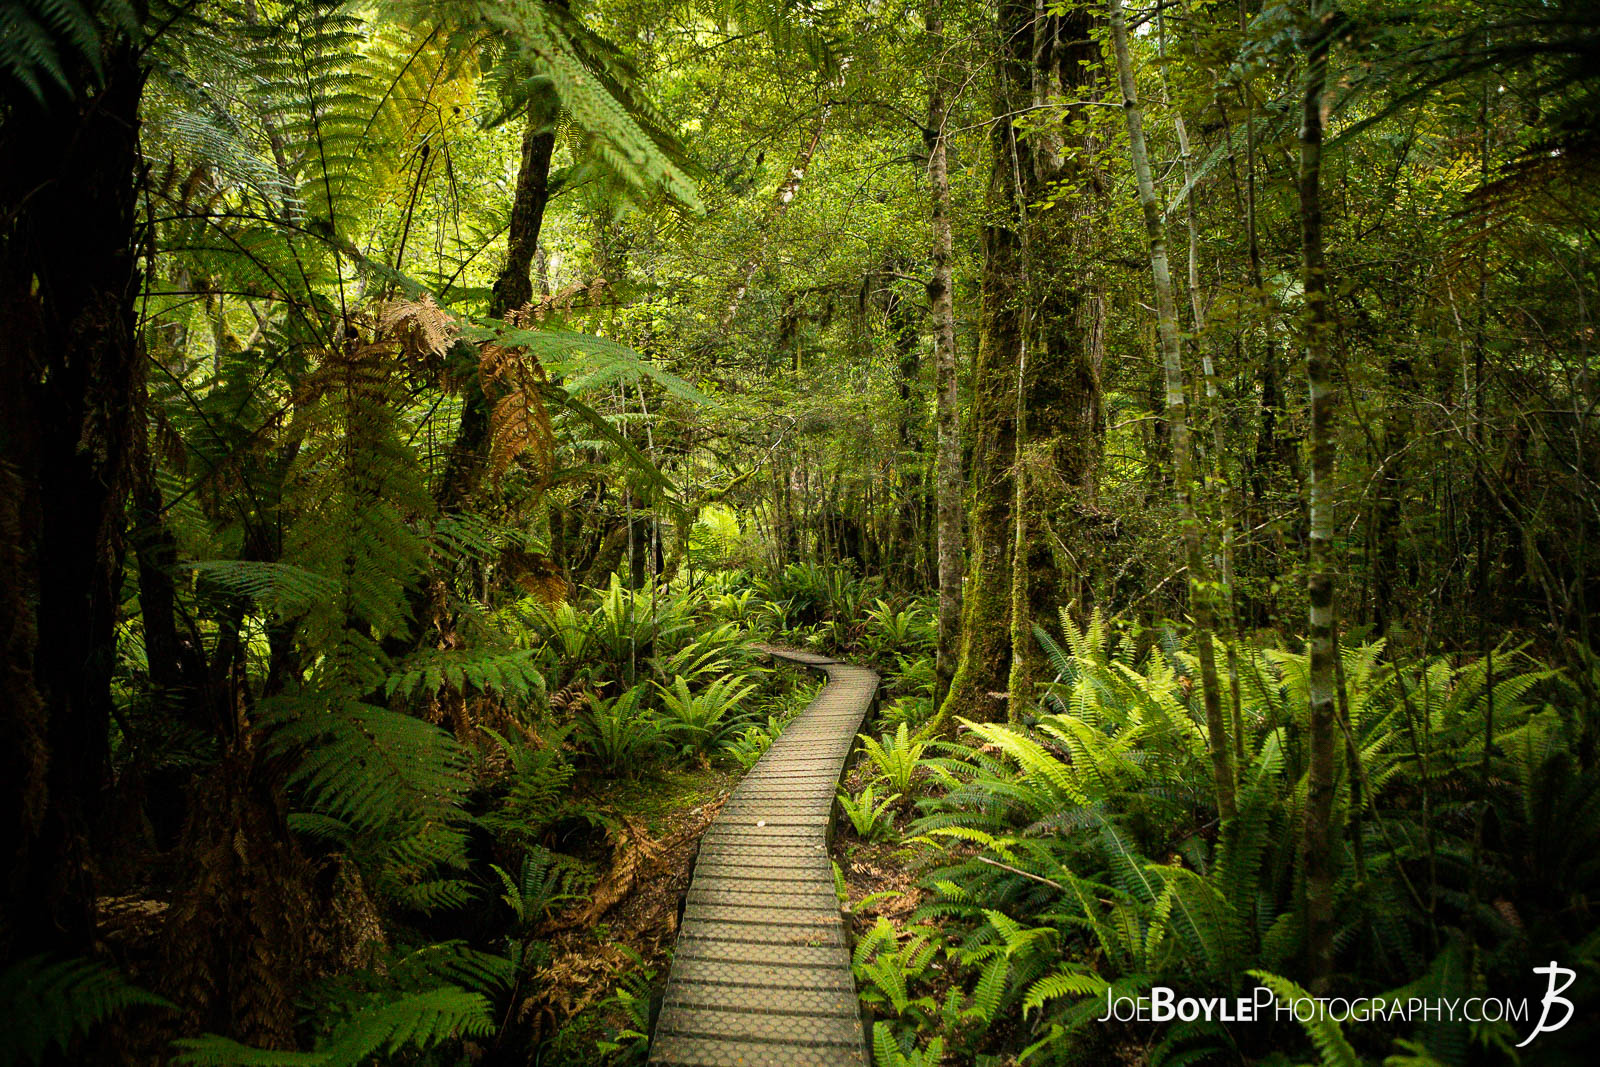  Here is a photo of a section on the Kepler Track in New Zealand. For some reason, everything right here just hit me and I thought it looked awesome. Perhaps it was the winding boardwalk in the forest, the composition and color of the trees. I'm not sure but I like it! 